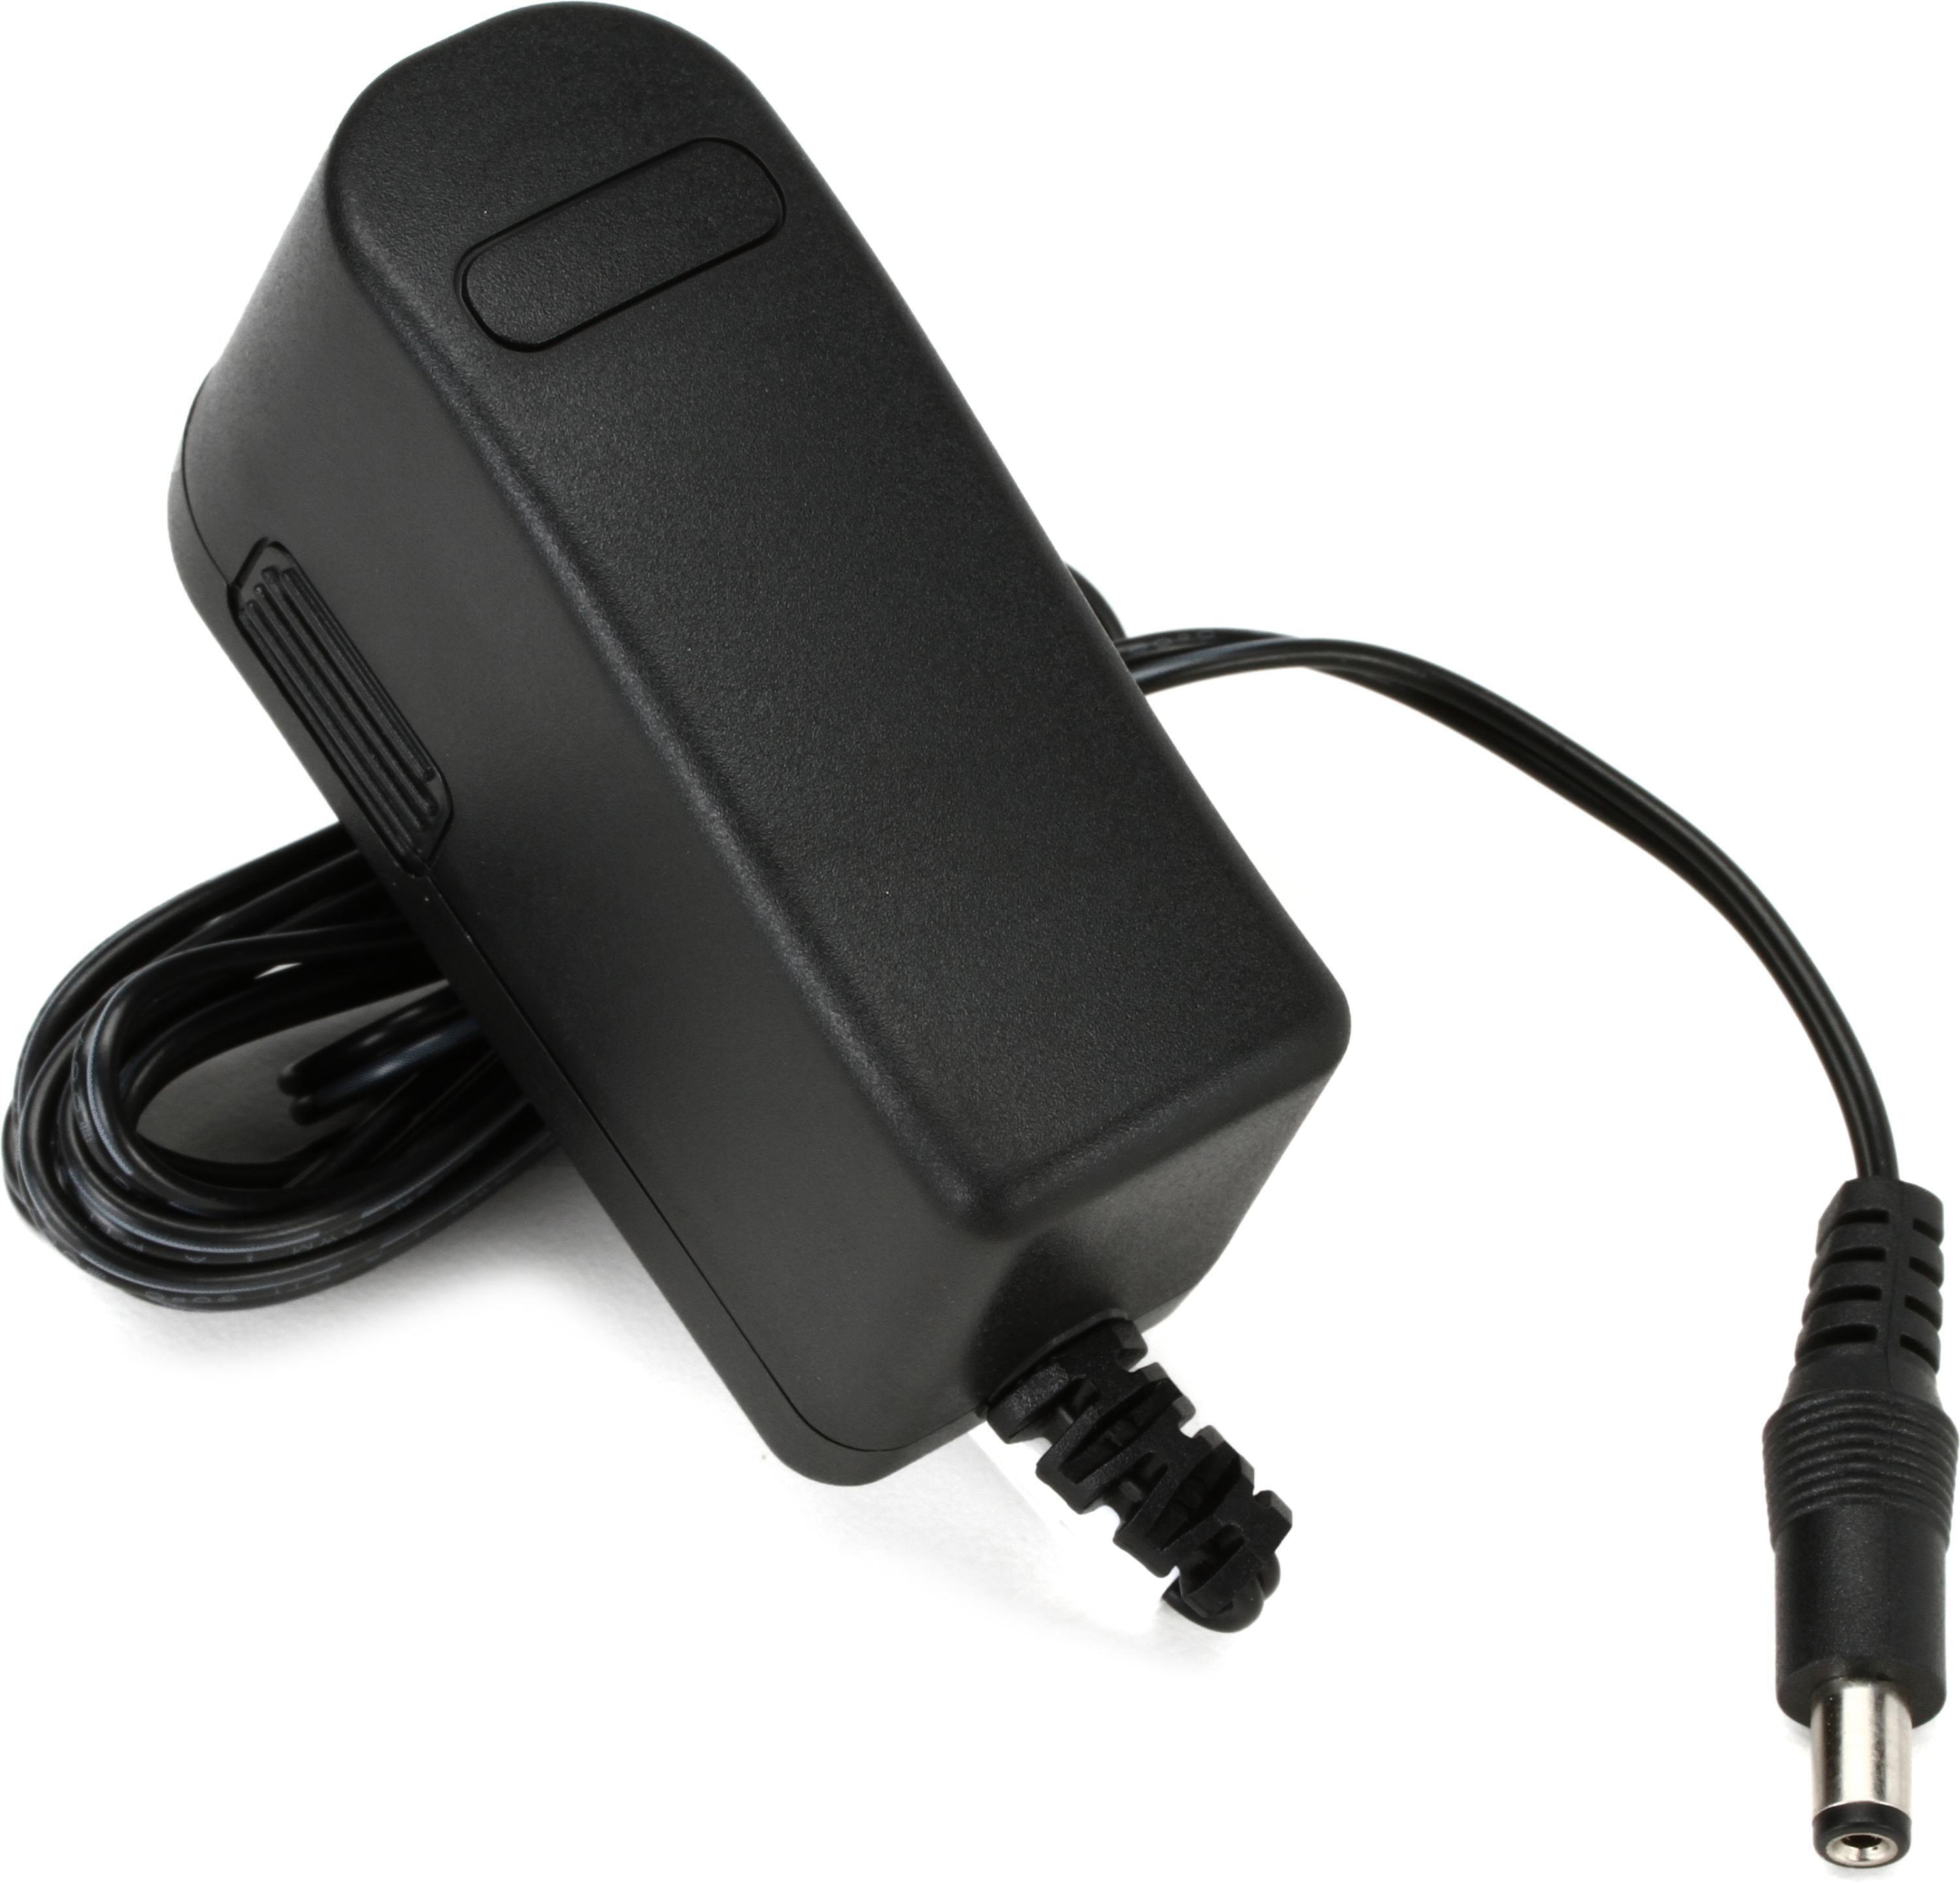 K-MAINS US AC/DC Adapter Battery Charger Replacement for Black